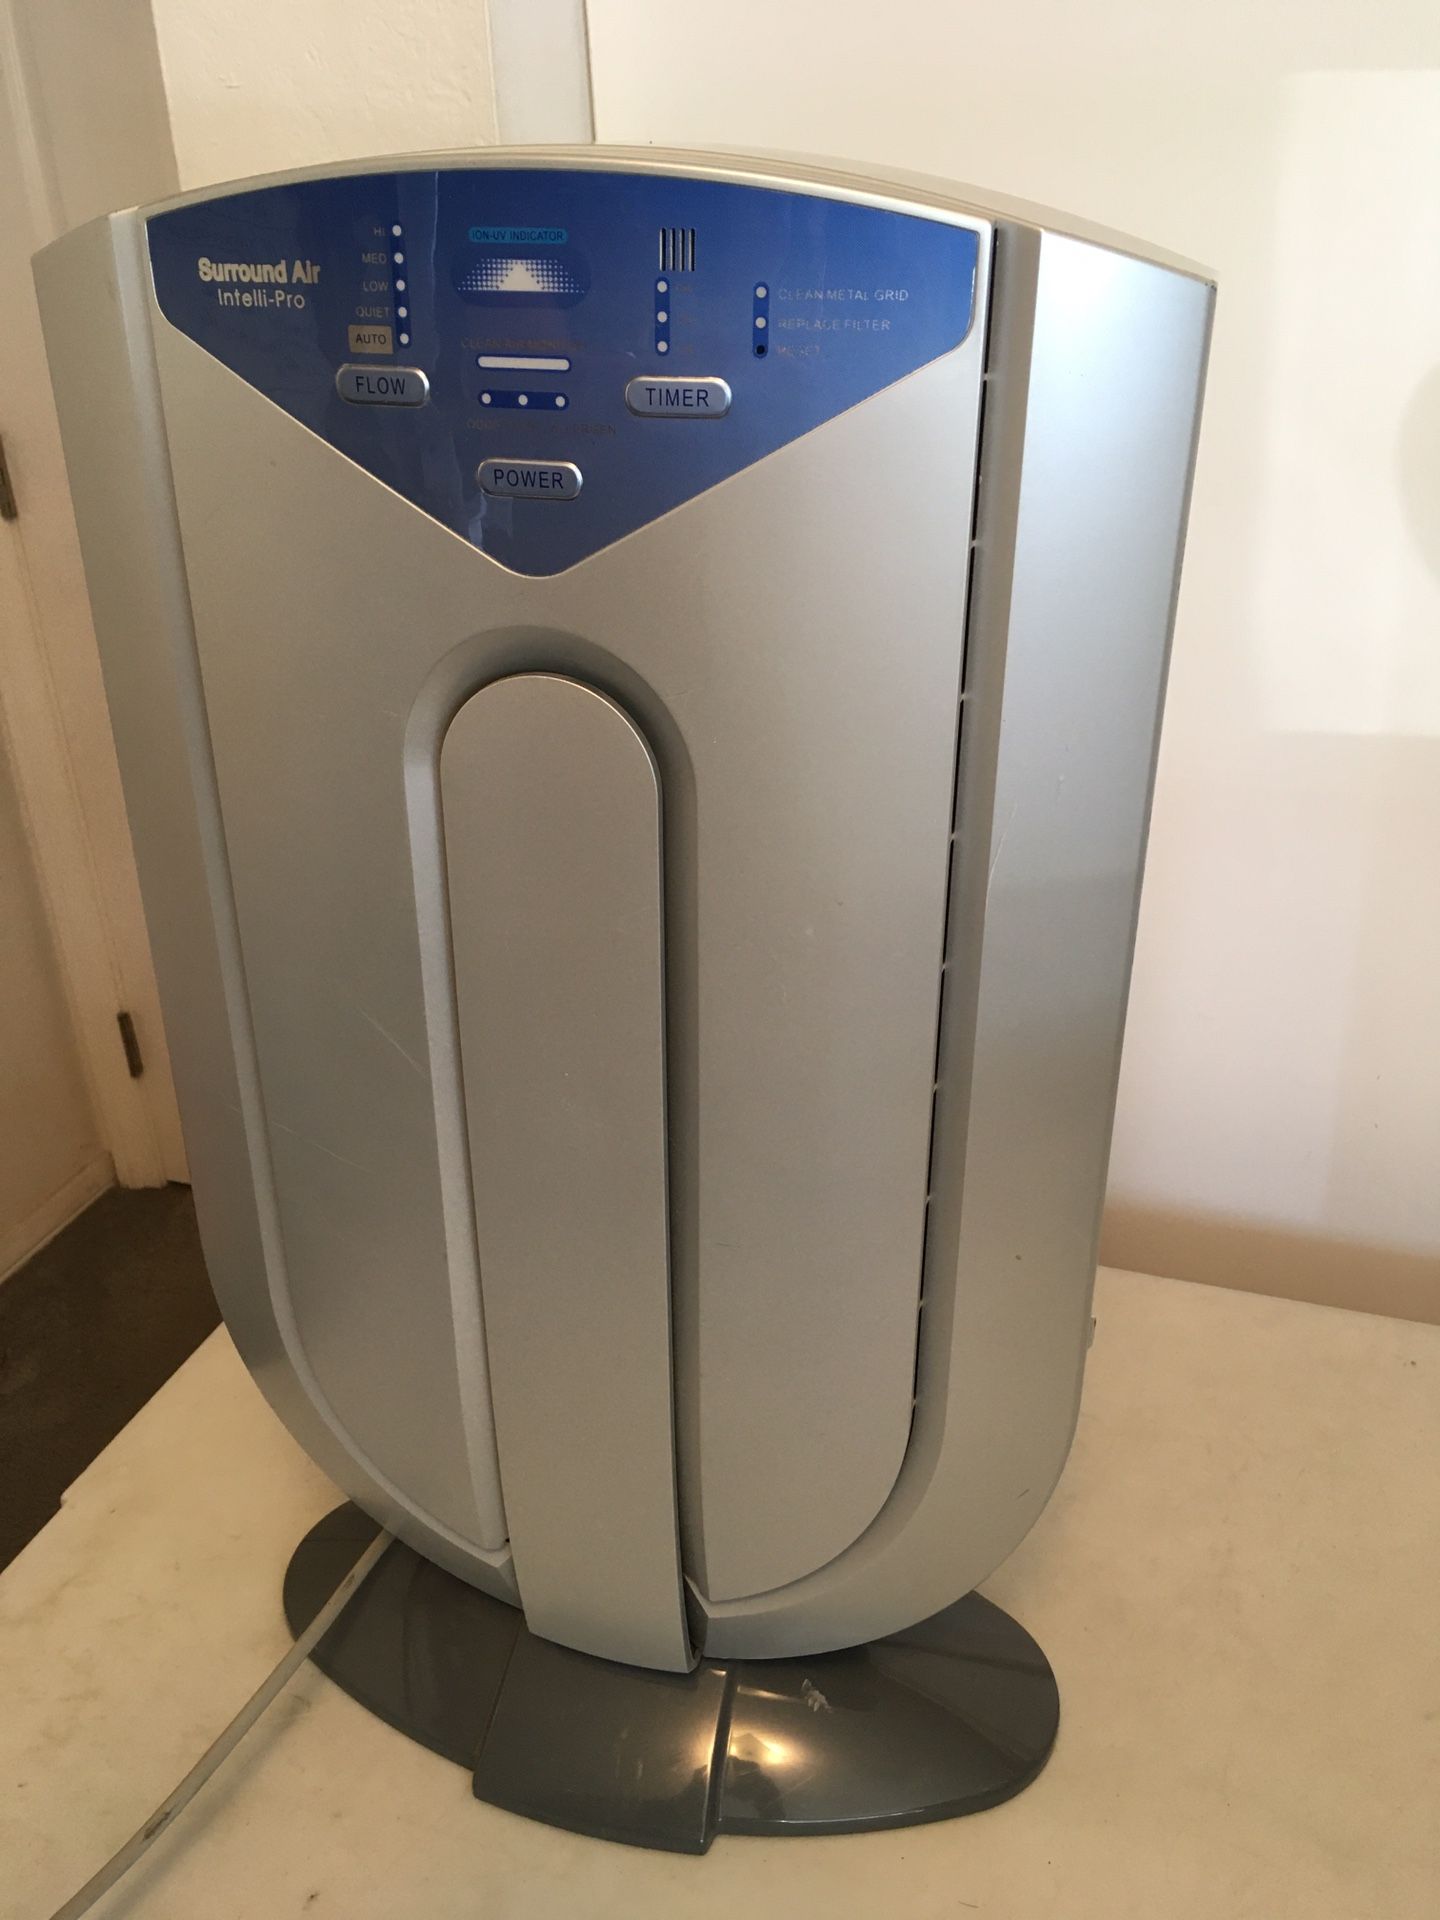 Surround Air XJ-3800-2 Intelli-Pro Air Purifier Hepa Carbon filter System for dust pollen virus bacteria etc sold as pictured, good condition, welcome